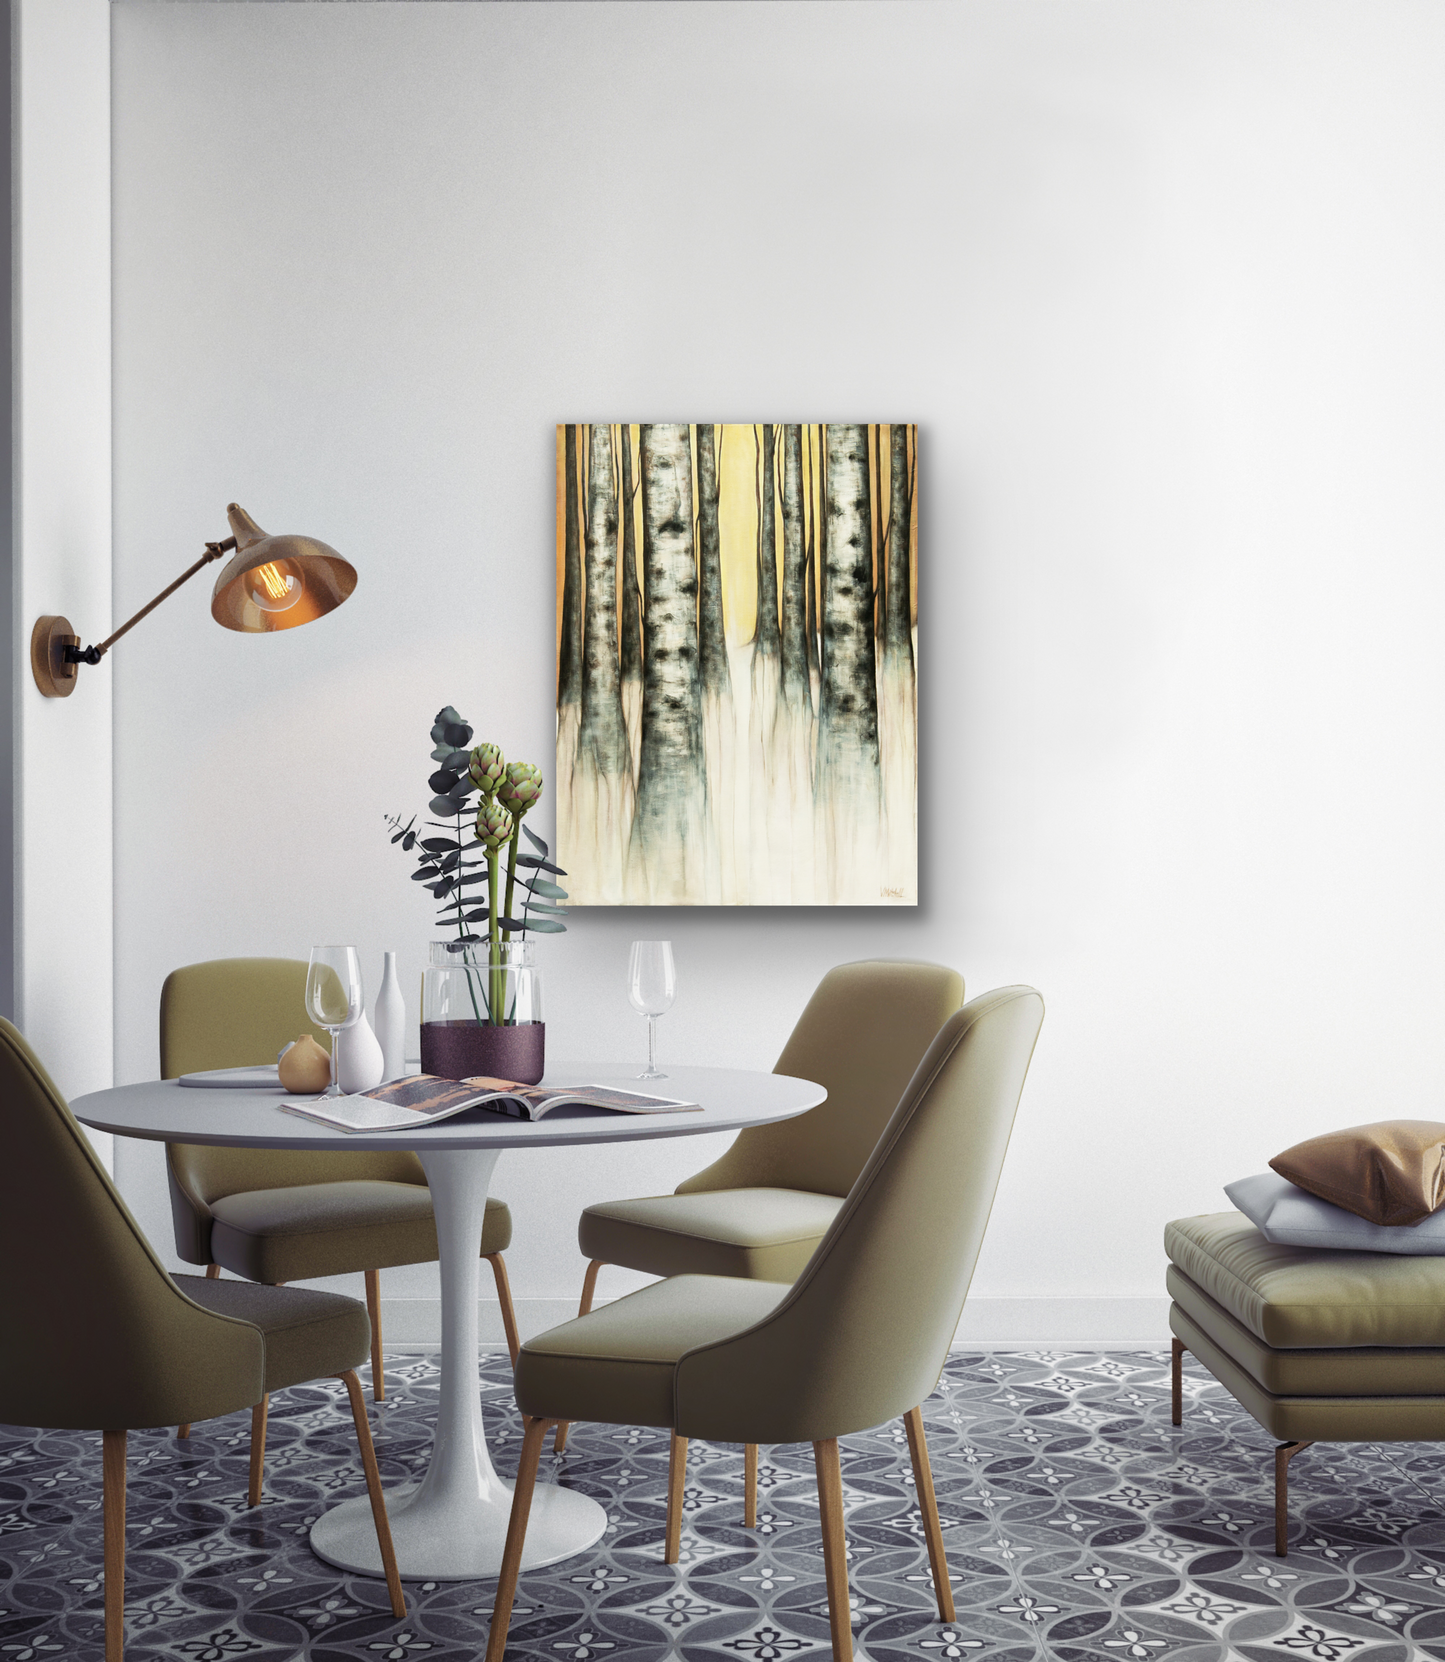 This wall art with it surreal calming natural setting is perfect for bedroom, living room or dining room.